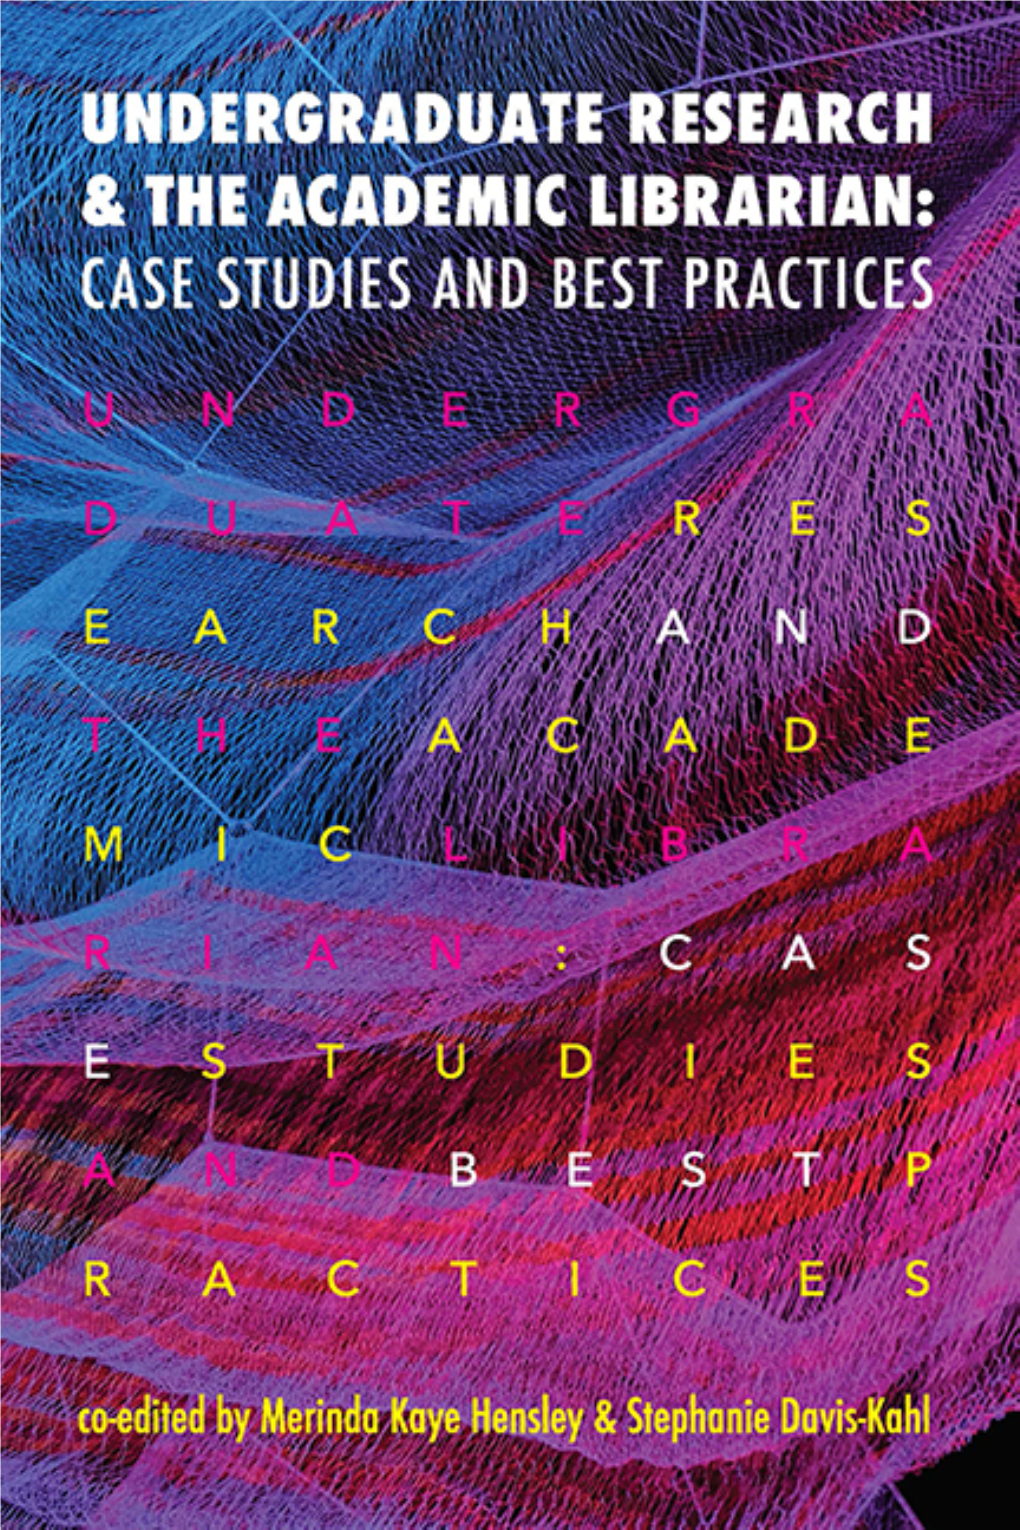 UNDERGRADUATE RESEARCH and the ACADEMIC LIBRARIAN: CASE STUDIES and BEST PRACTICES Edited by Merinda Kaye Hensley & Stephanie Davis-Kahl